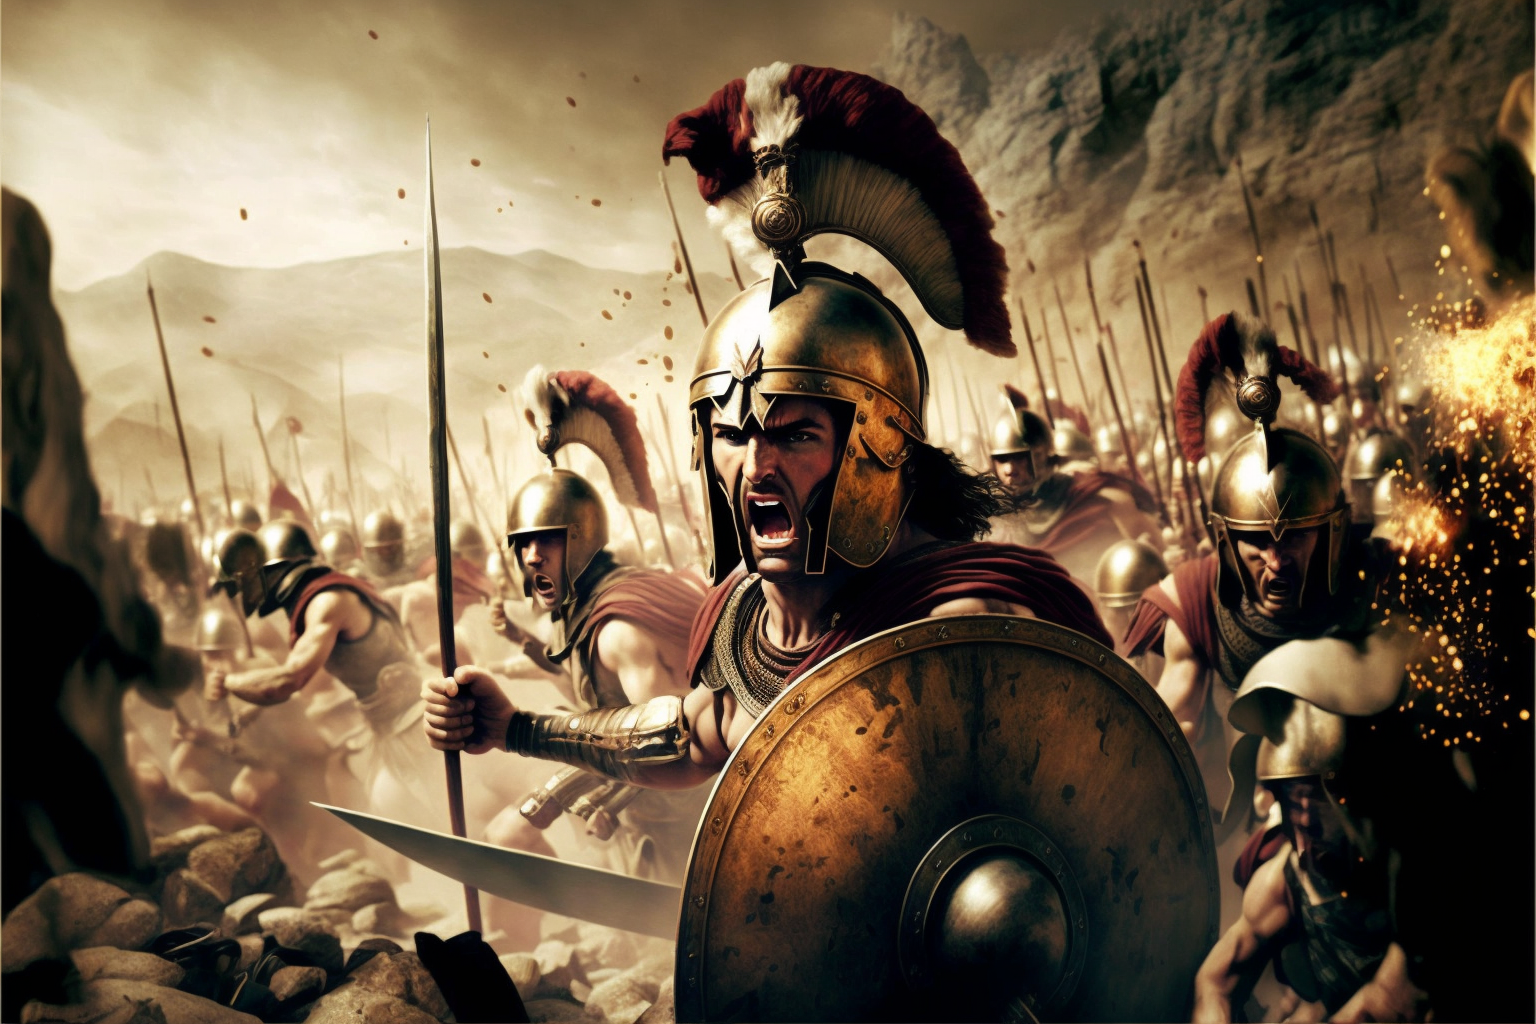 The Battle of Thermopylae: The Story of the 300 Spartans